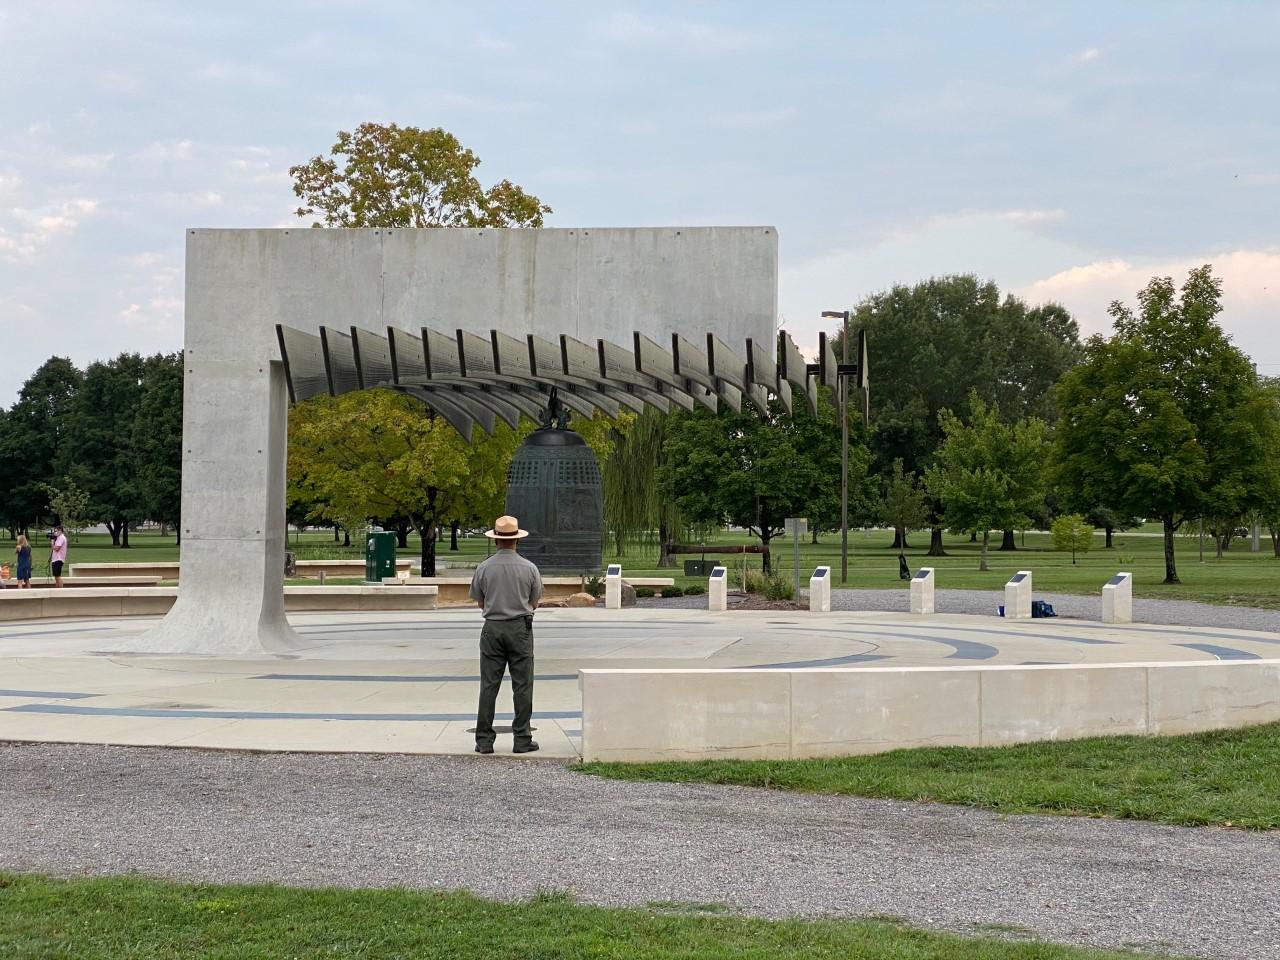 Ranger facing a large bronze cast bell hanging from an abstract pavilion surrounded by green space